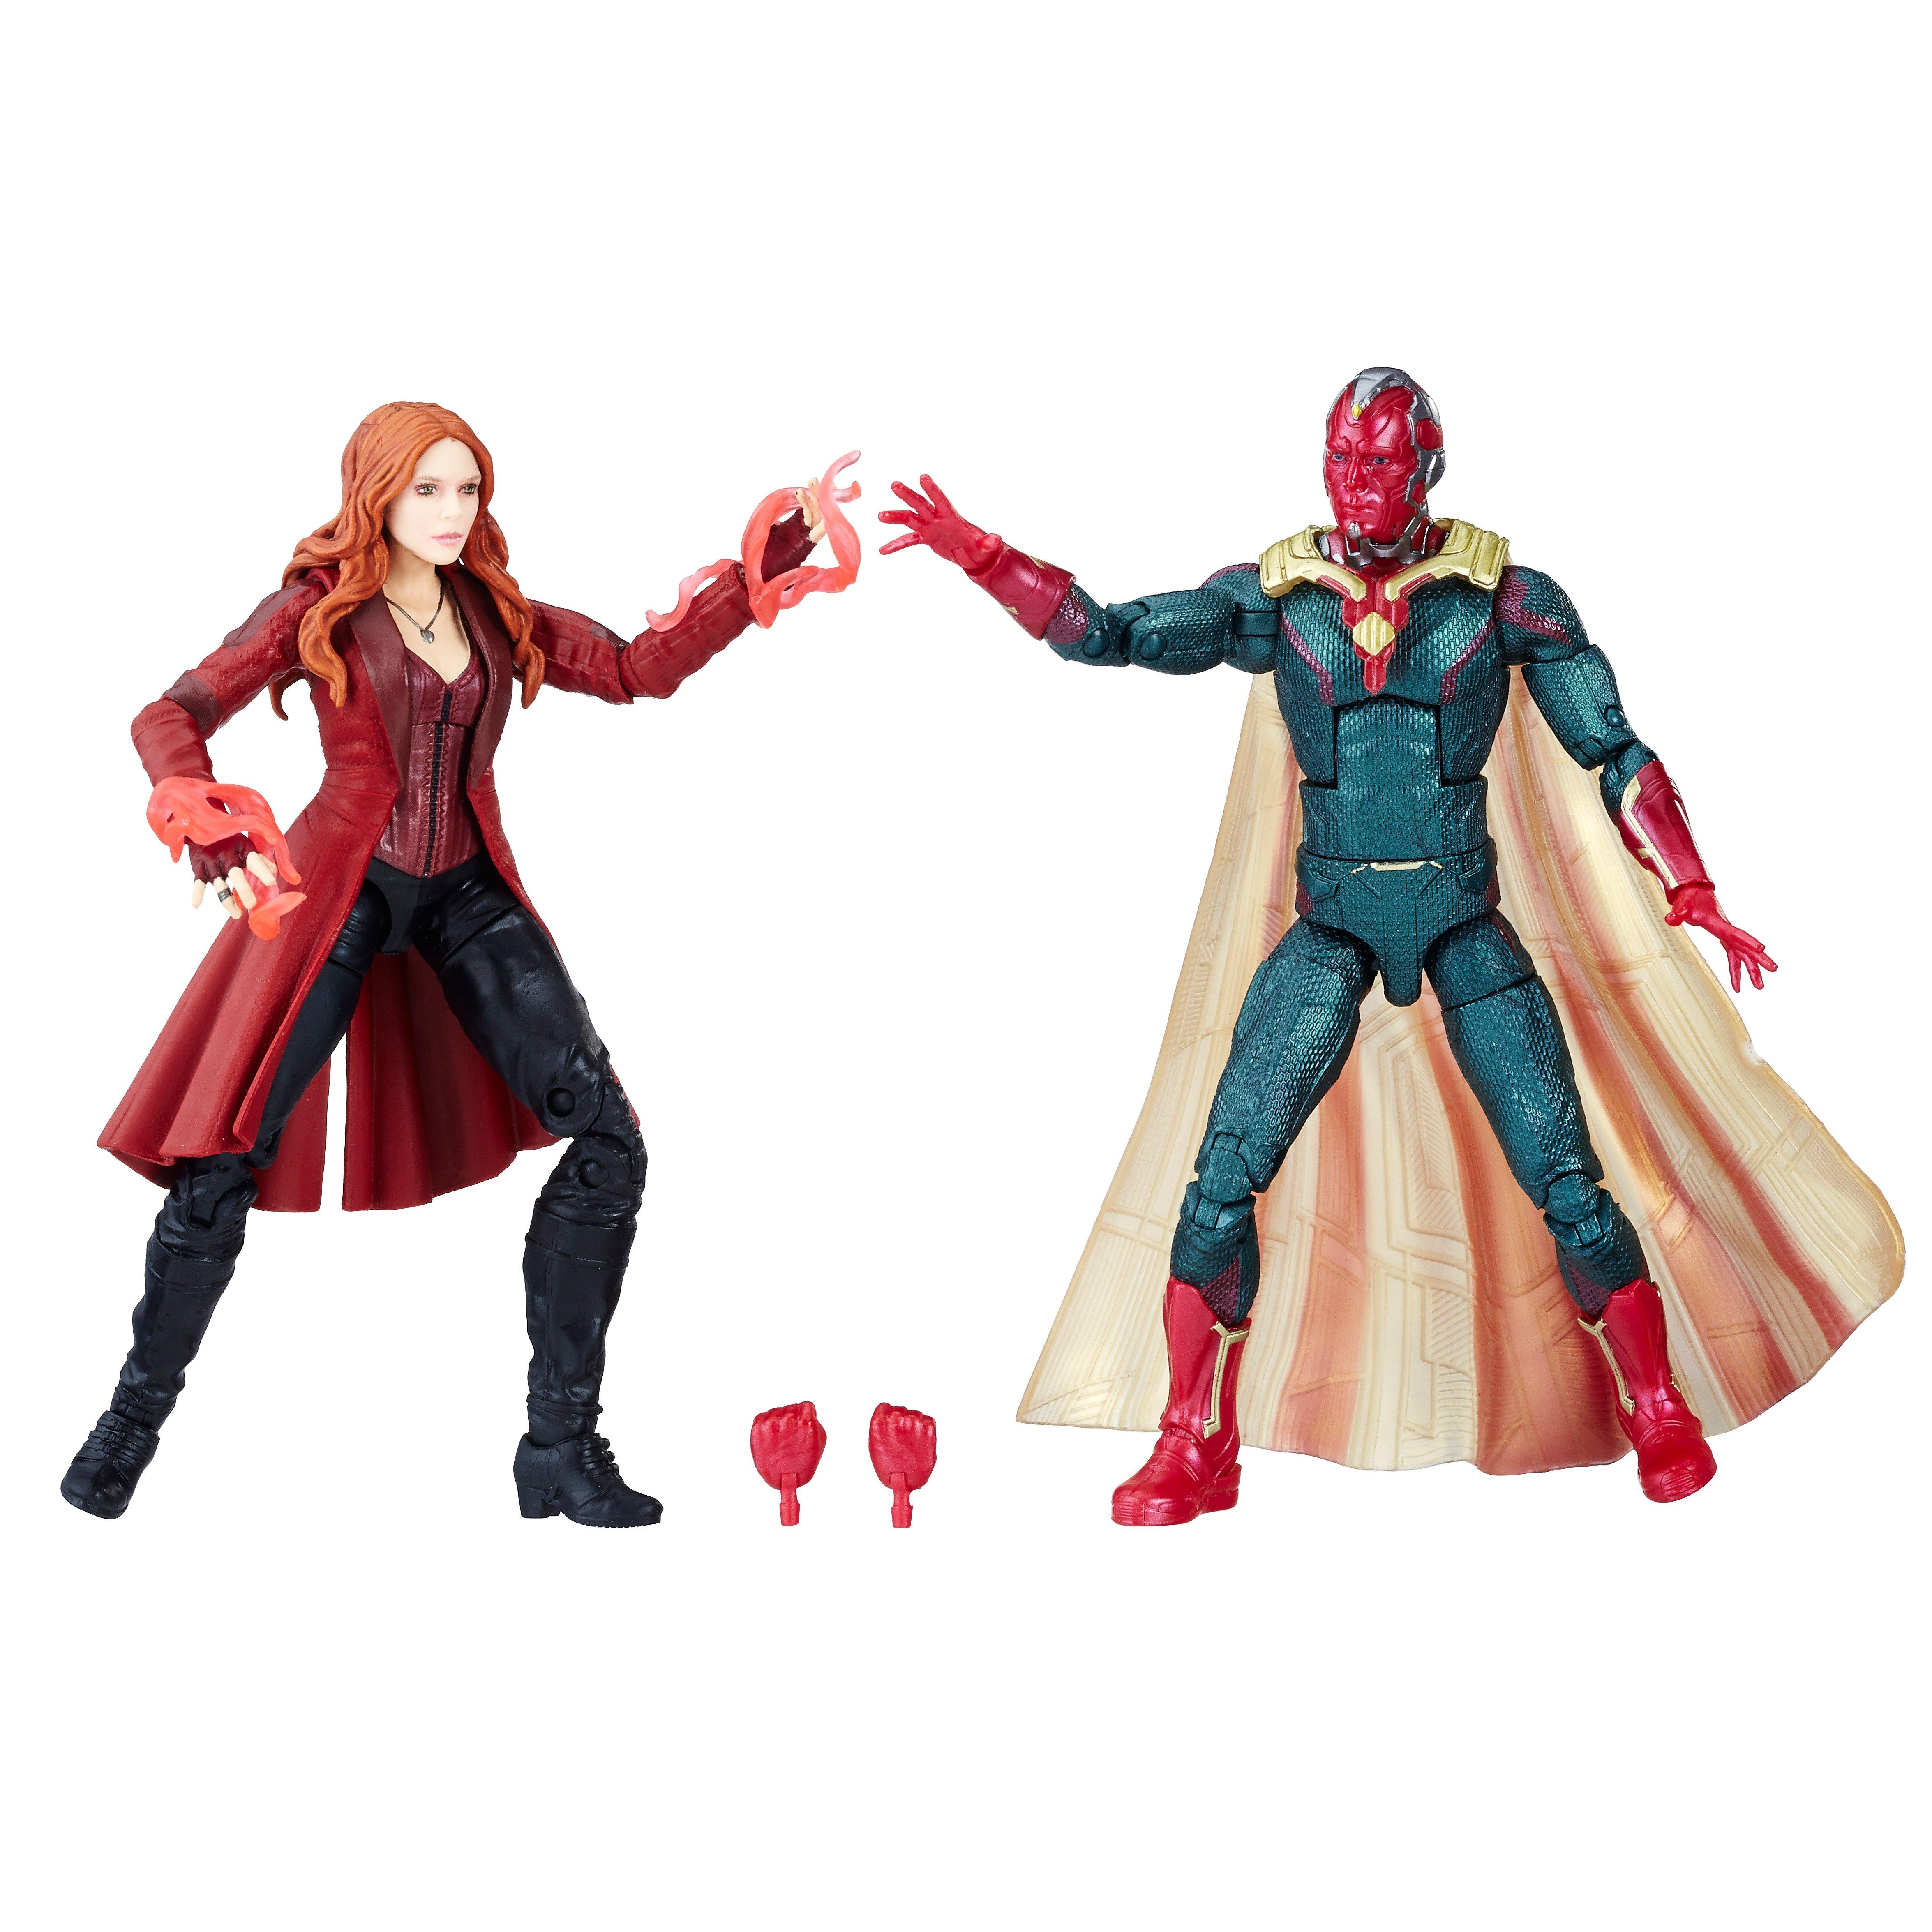 vision infinity war action figure